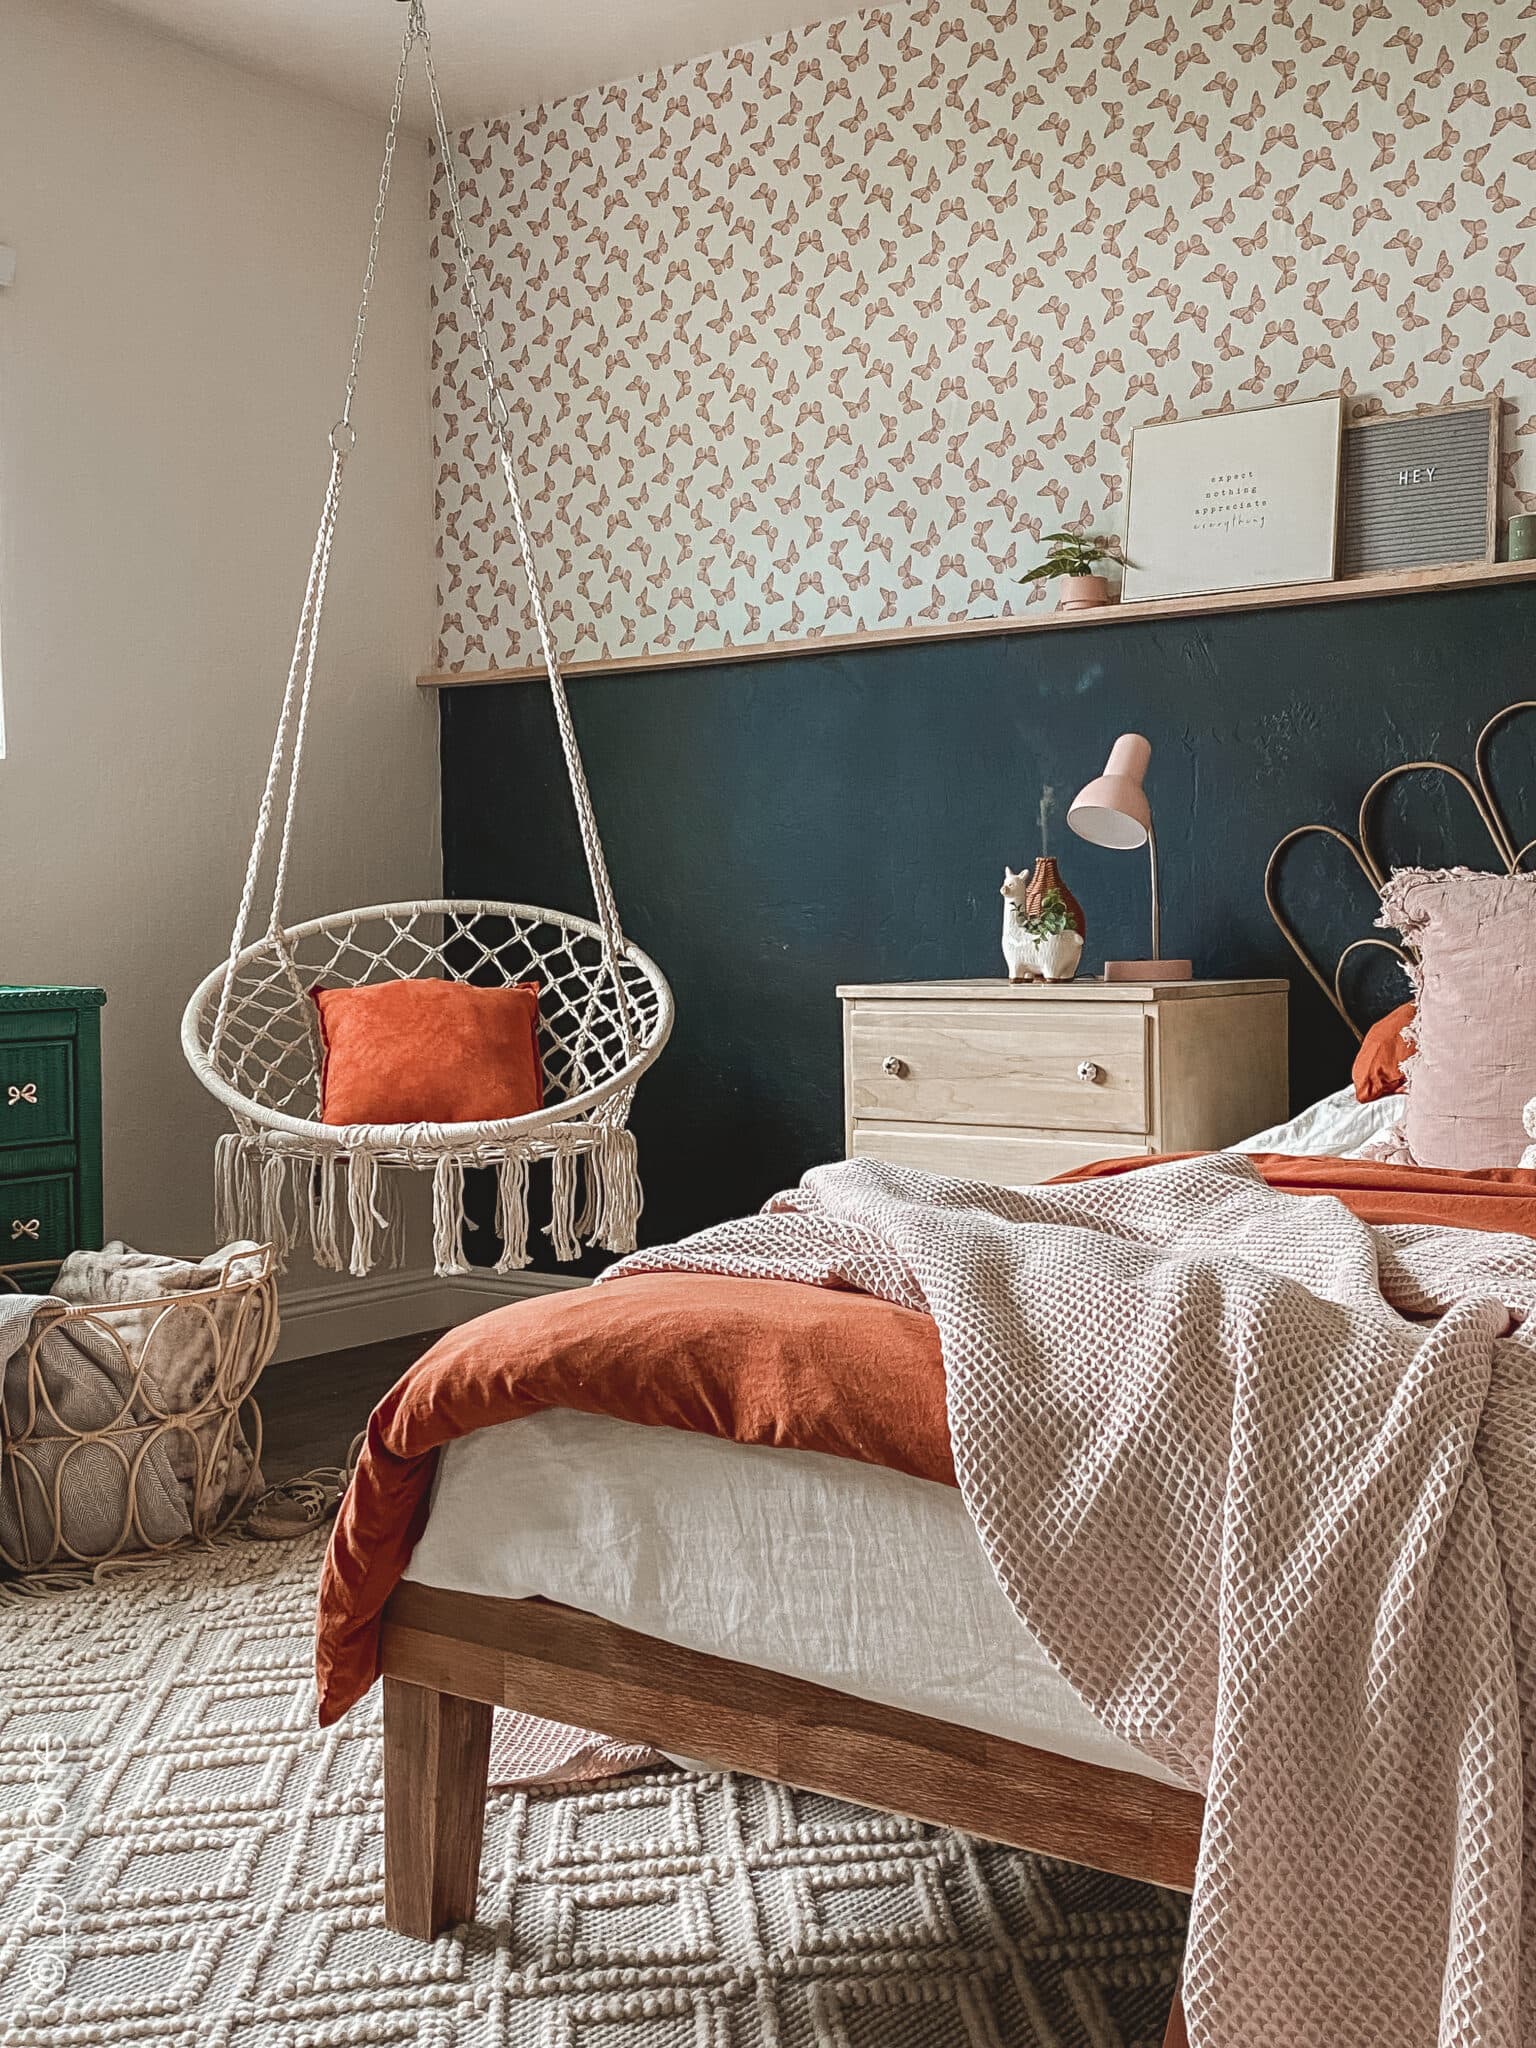 Transform her space into a boho haven with thrifted finds and DIY charm! Mix neutral bedding with boho butterfly wallpaper for a whimsical touch. Add personalized flair with eclectic throw pillows and a DIY shelf, creating a cozy sanctuary with a playful twist. #BohoDecor #GirlsBedroom #DIYInspiration